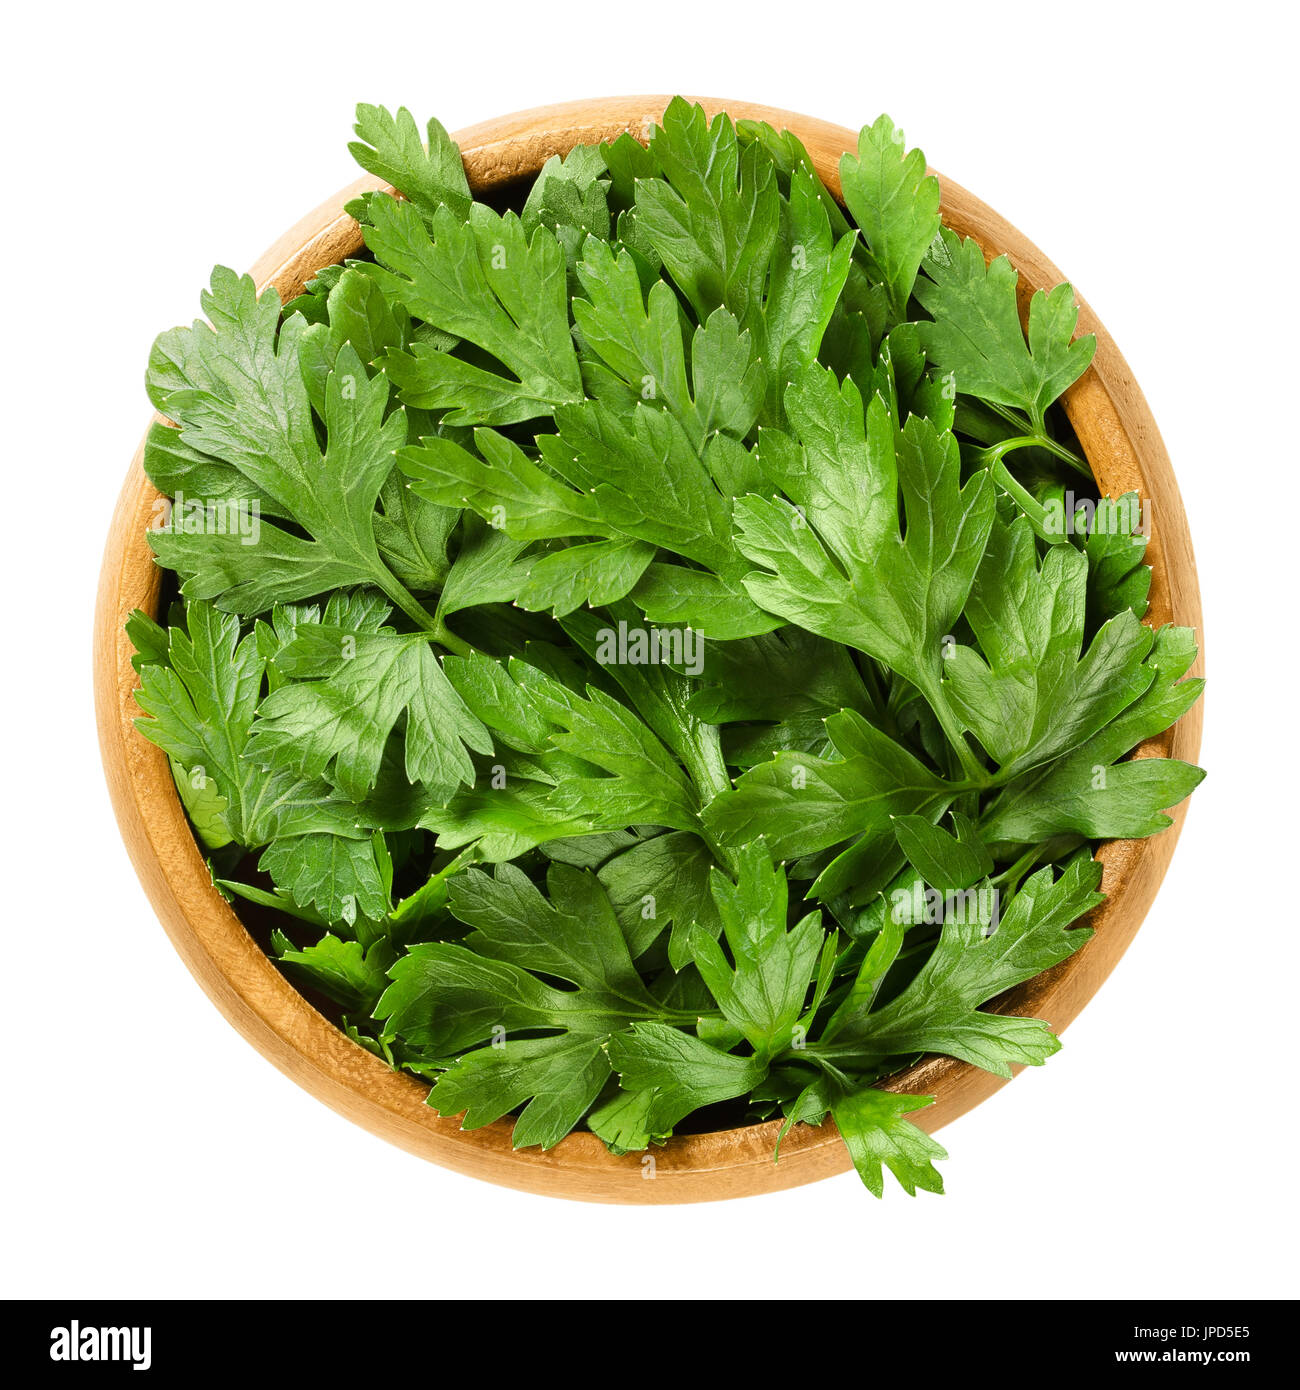 Fresh flat leaf parsley in wooden bowl. Green leaves of Petroselinum crispum, used as herb, spice and vegetable. Isolated macro food photo close up. Stock Photo